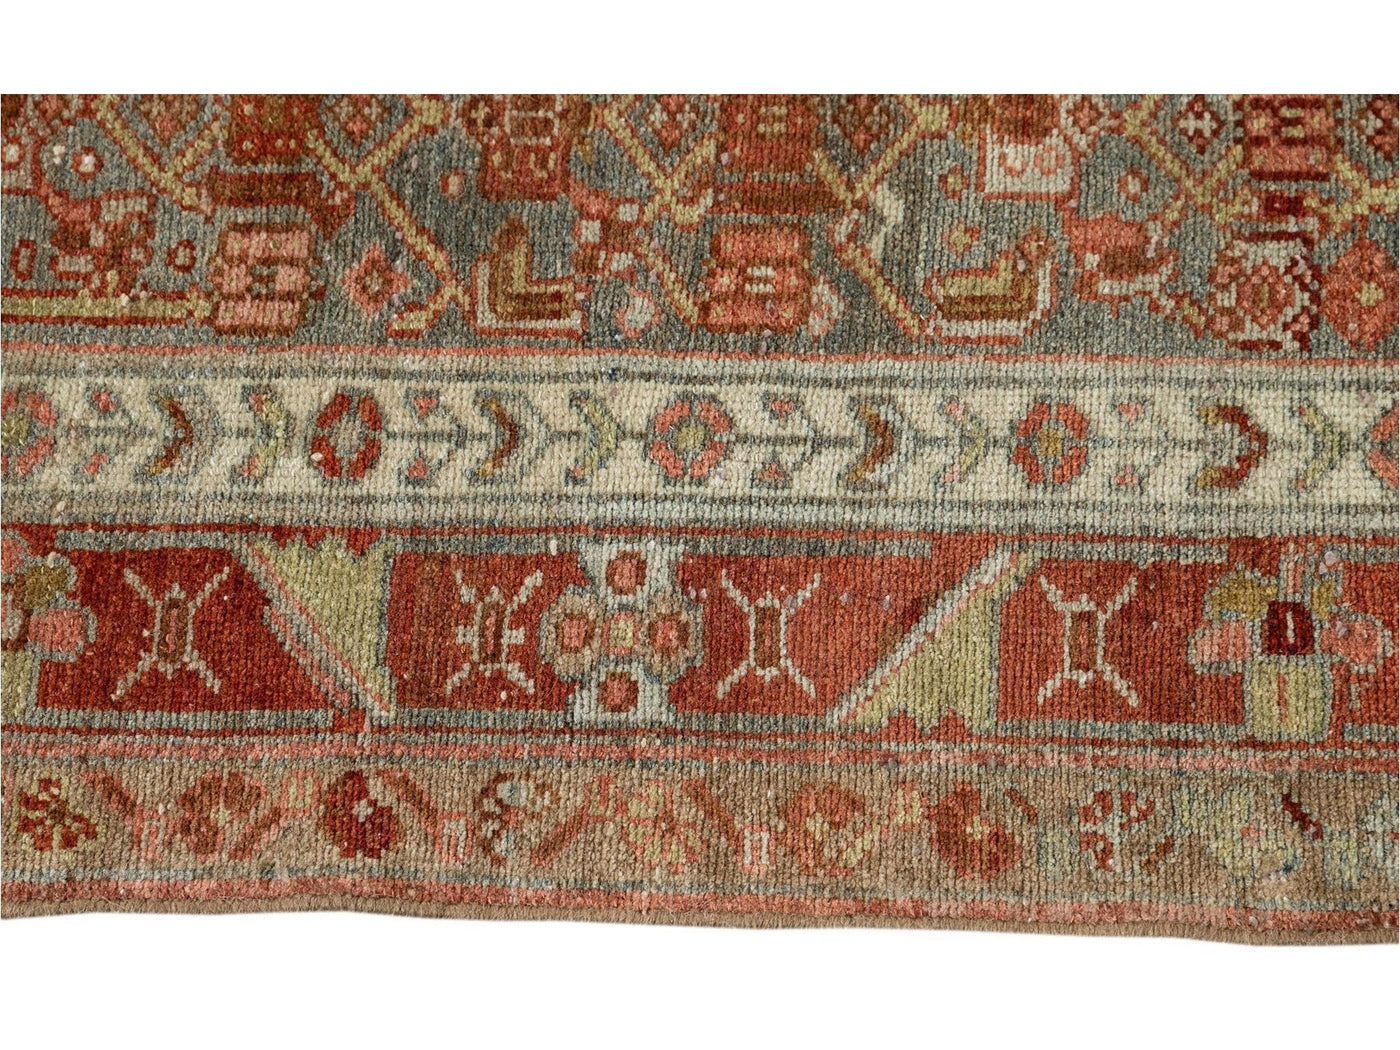 Early 20th Century Antique Malayer Wool Runner Rug, 3 X 16